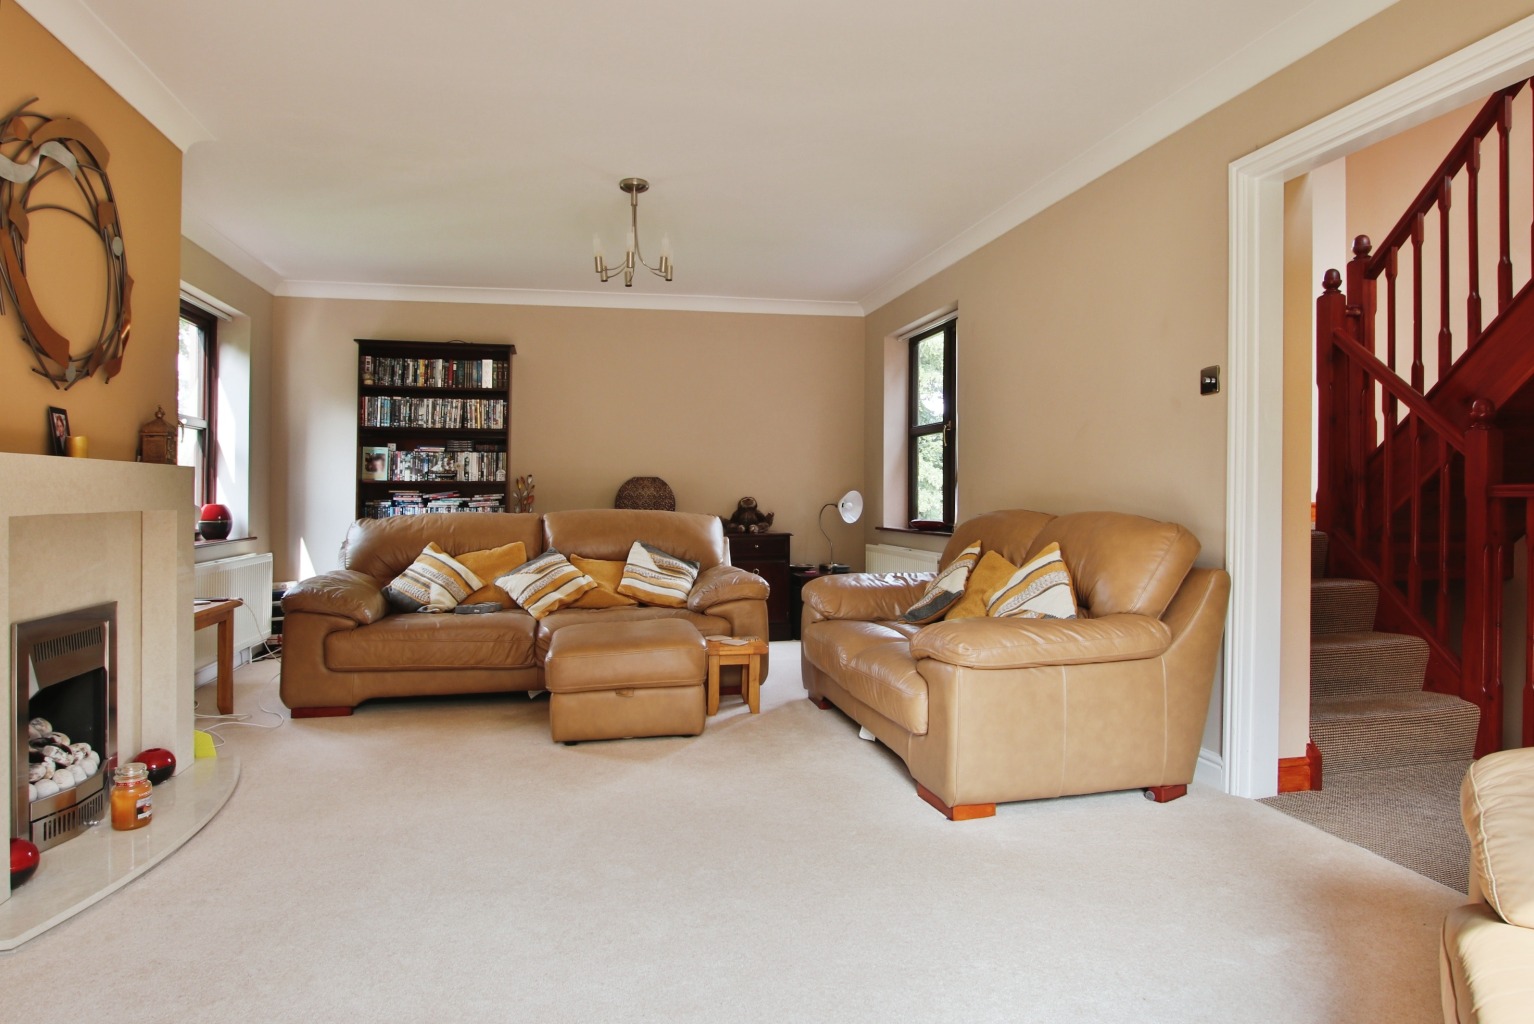 4 bed detached house for sale in Caistor Road, Barton upon Humber  - Property Image 11